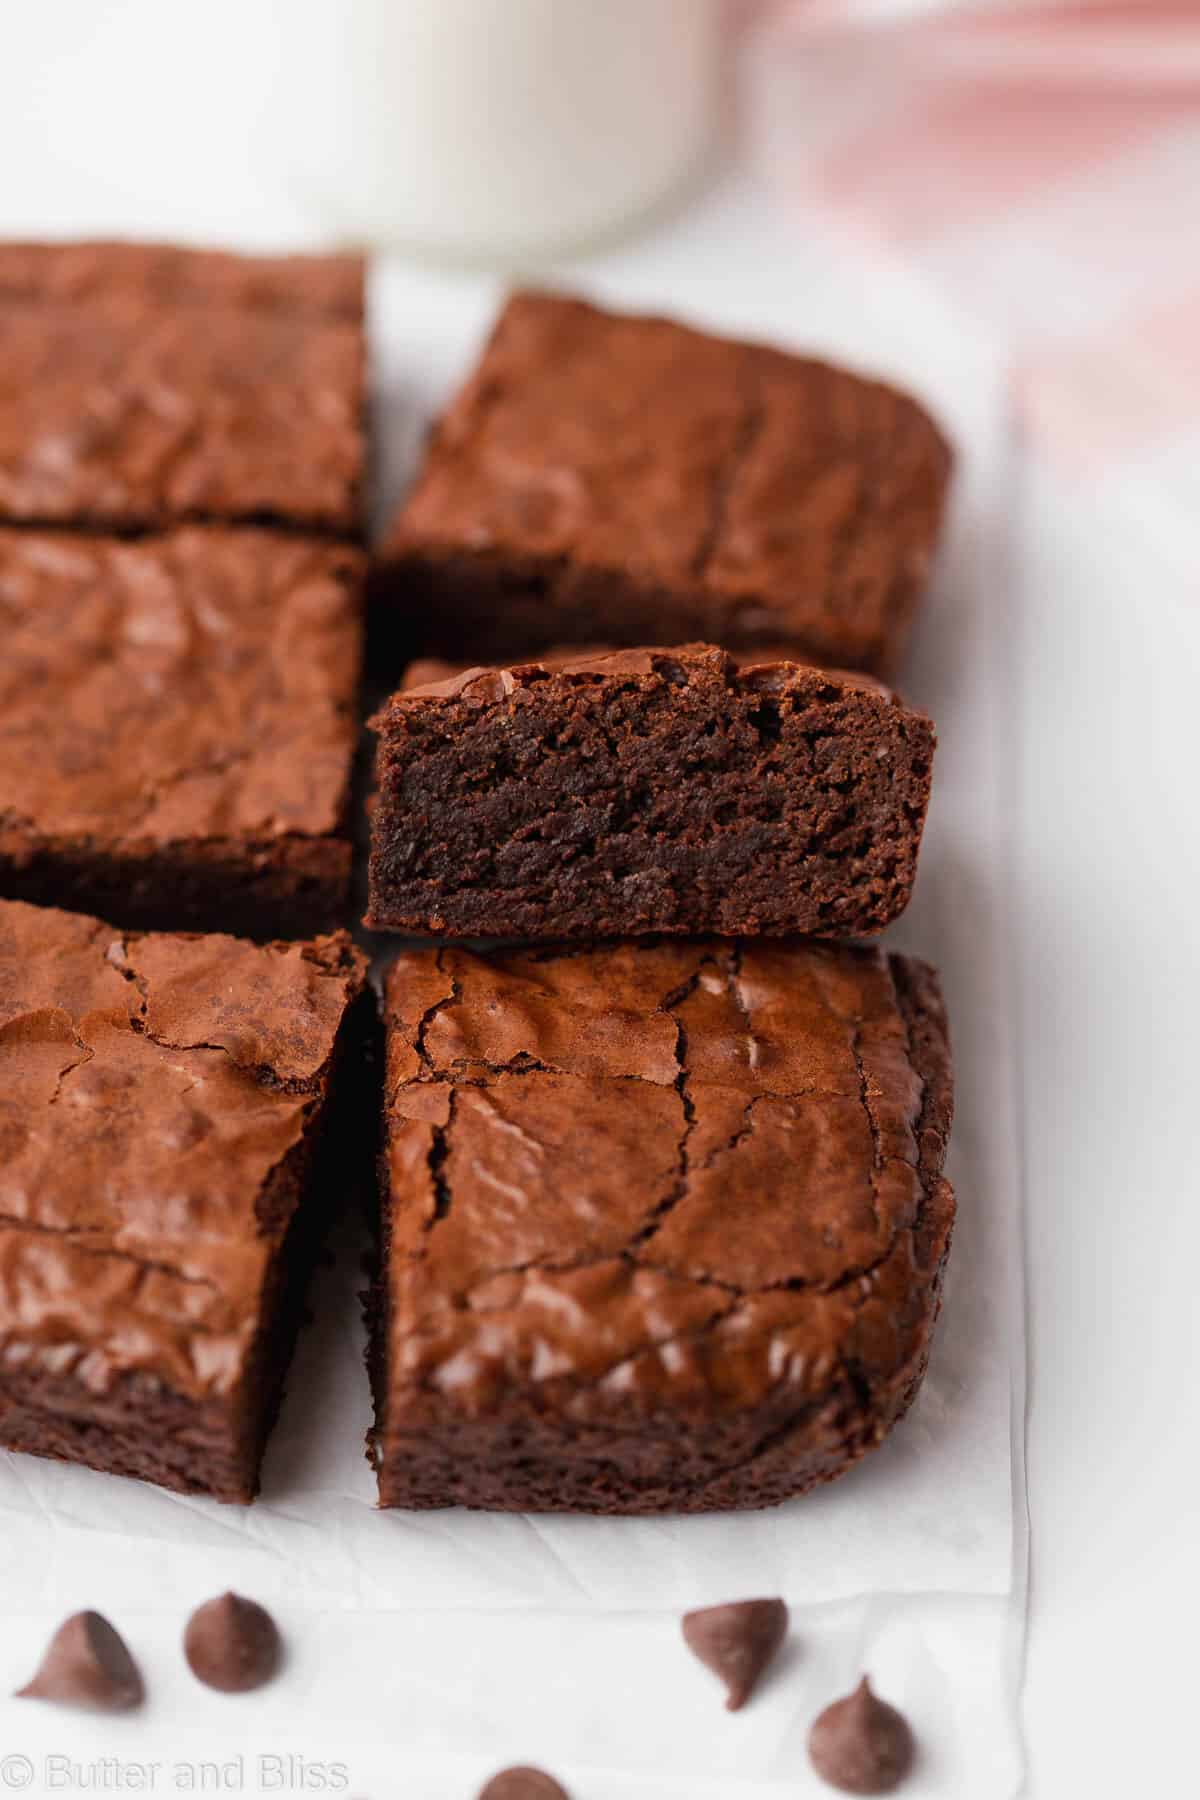 Gluten free brownies cut into bars on a table